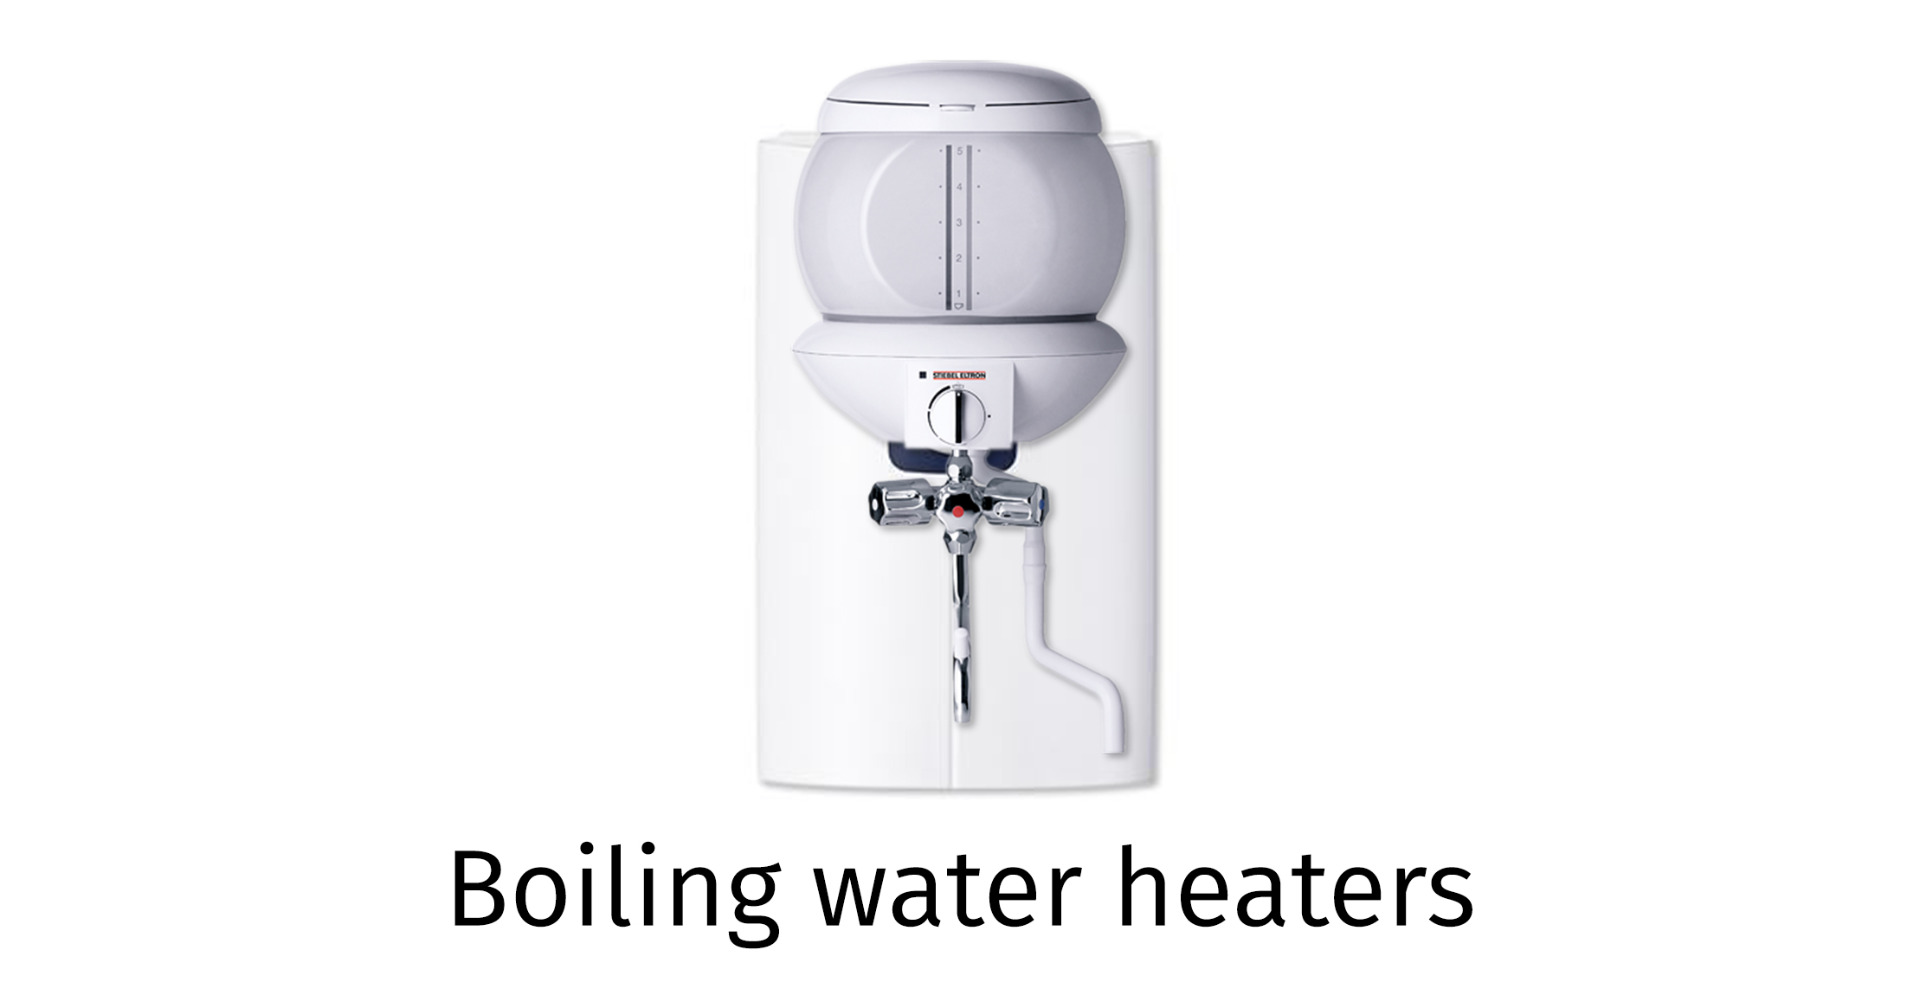 Boiling water heaters